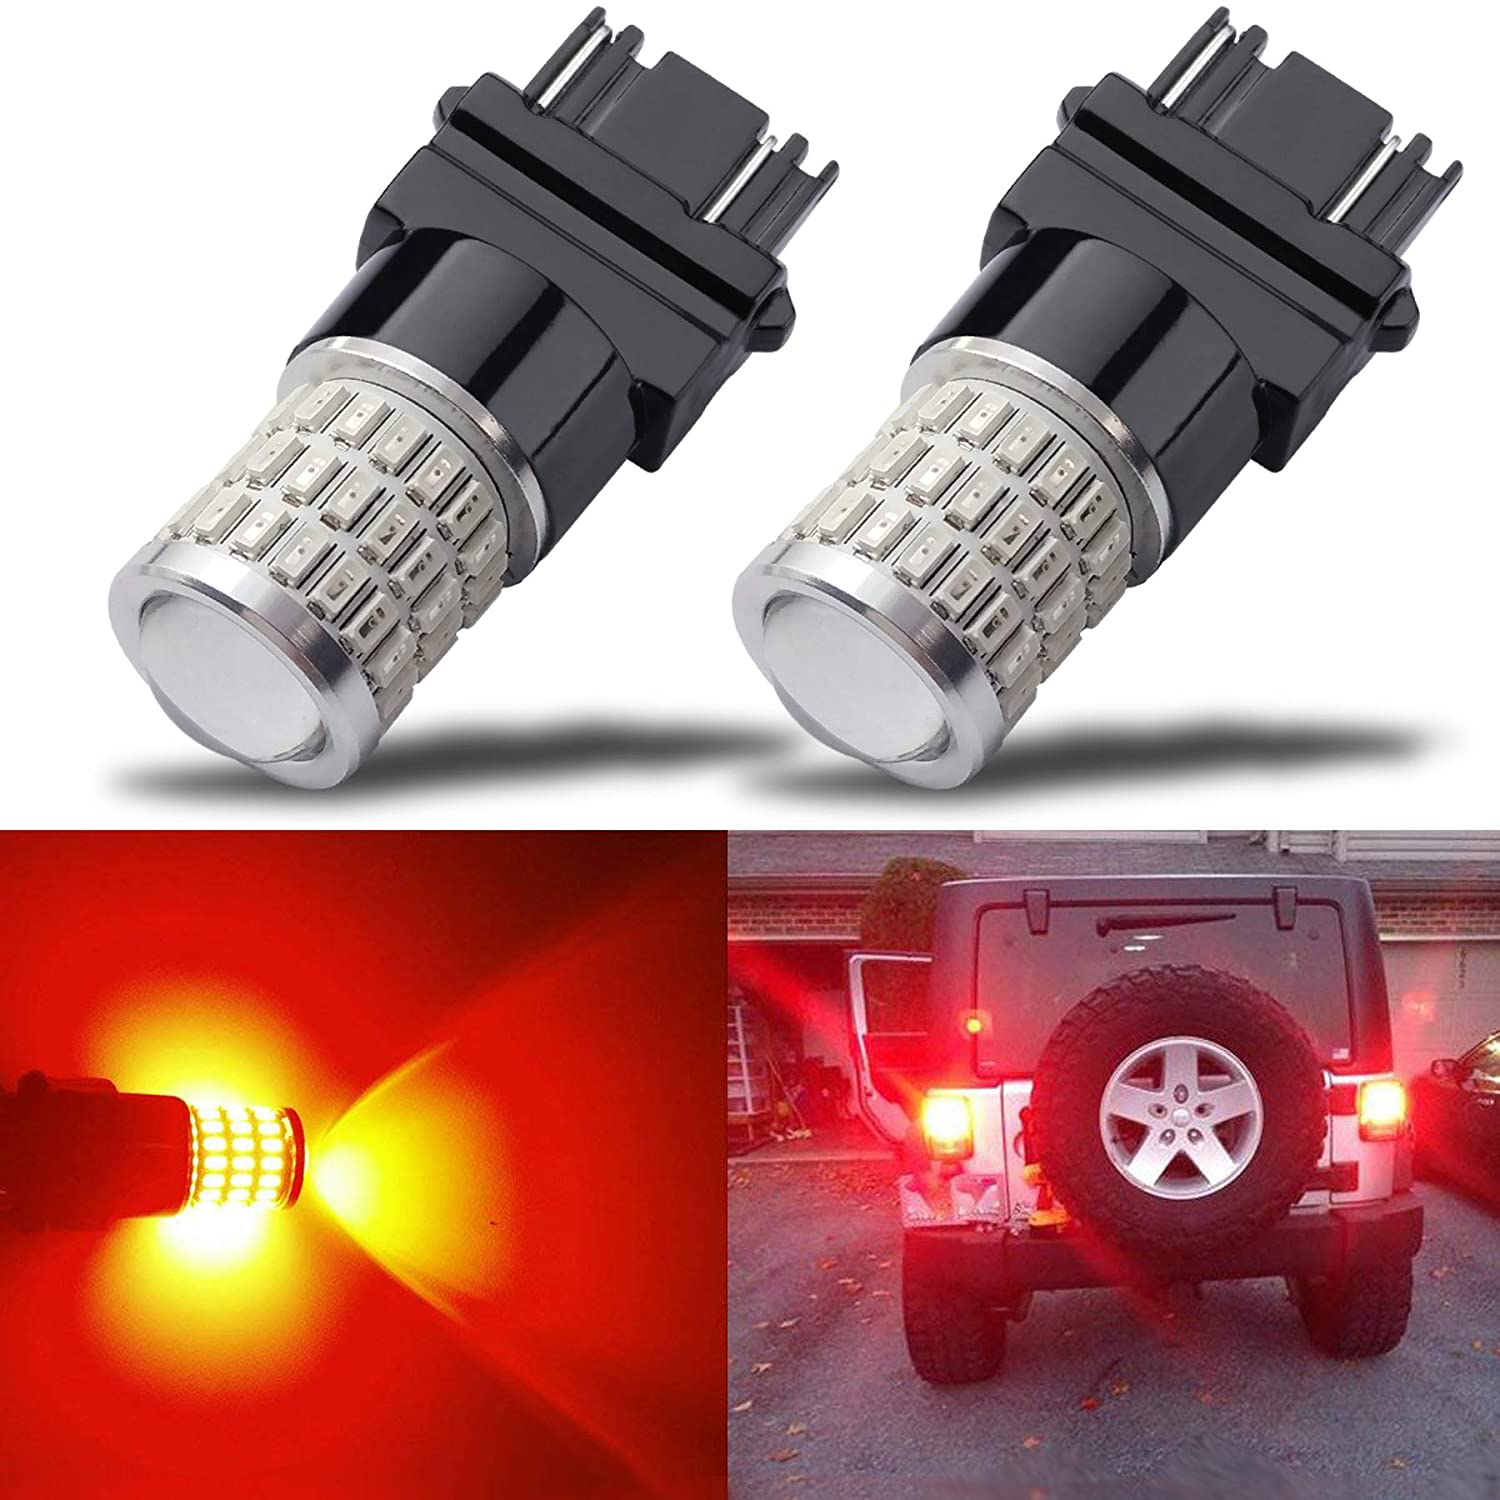 iBrightstar Newest 9-30V Super Bright Low Power 3156 3157 3057 4157 LED Bulbs with Projector Lenses Replacement for Front/Rear Turn Signal Blinker Lights or Brake Tail Parking Lights